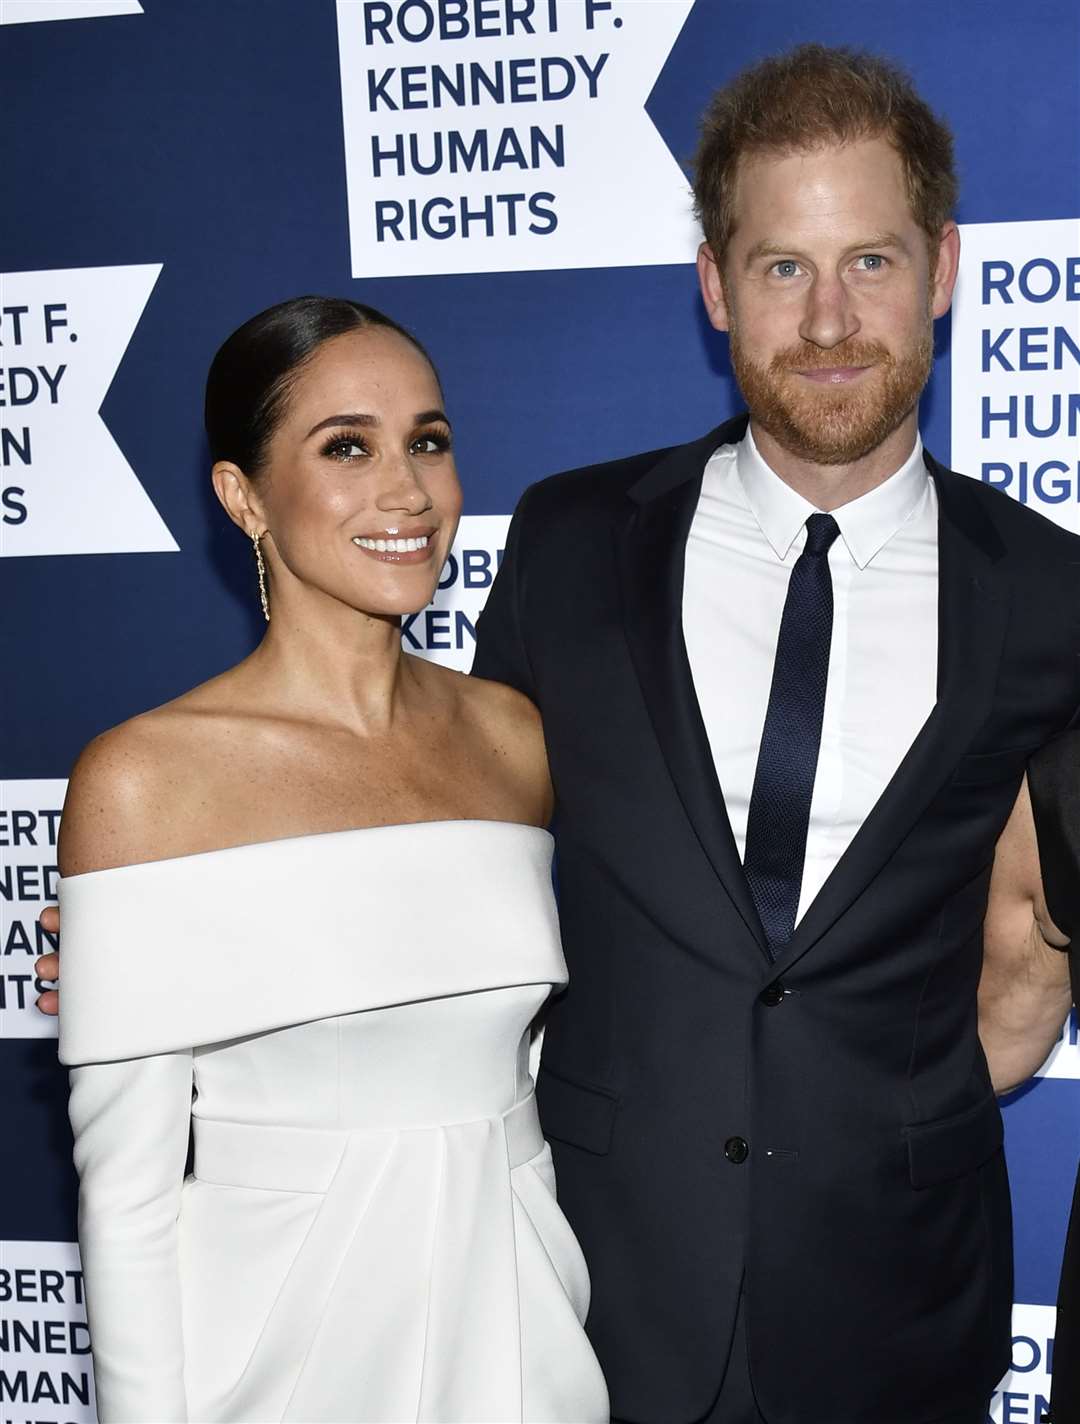 Harry and Meghan received the Ripple of Hope Award at a gala by the Robert F Kennedy Human Rights (RFKHR) organisation on Tuesday night (Evan Agostini/AP)